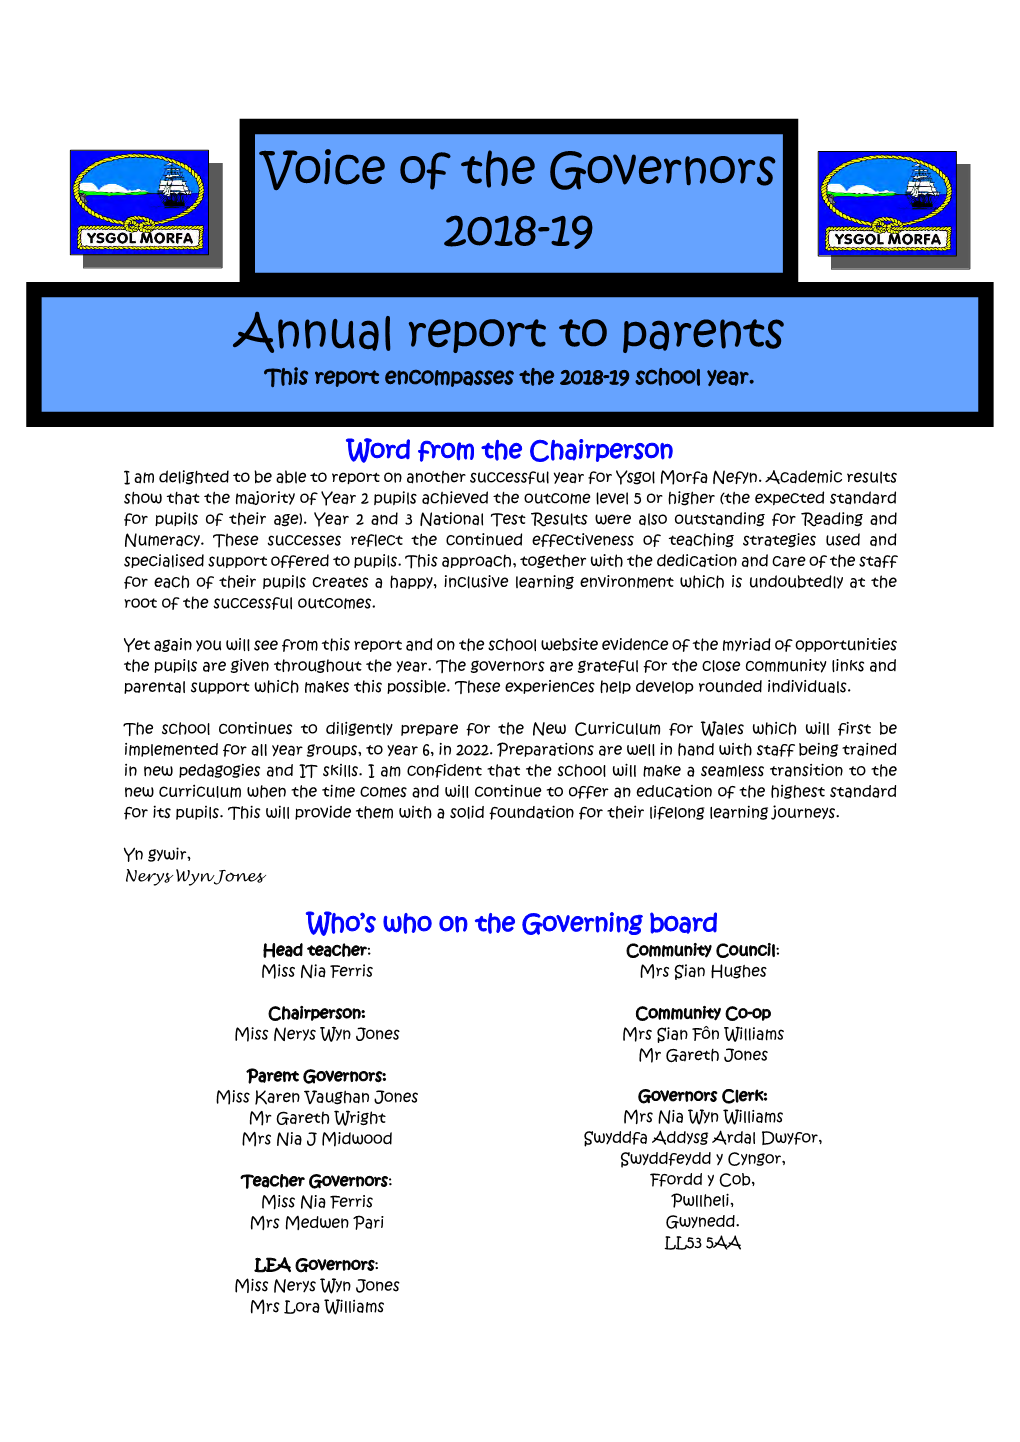 Voice of the Governors 2018-19 Annual Report to Parents